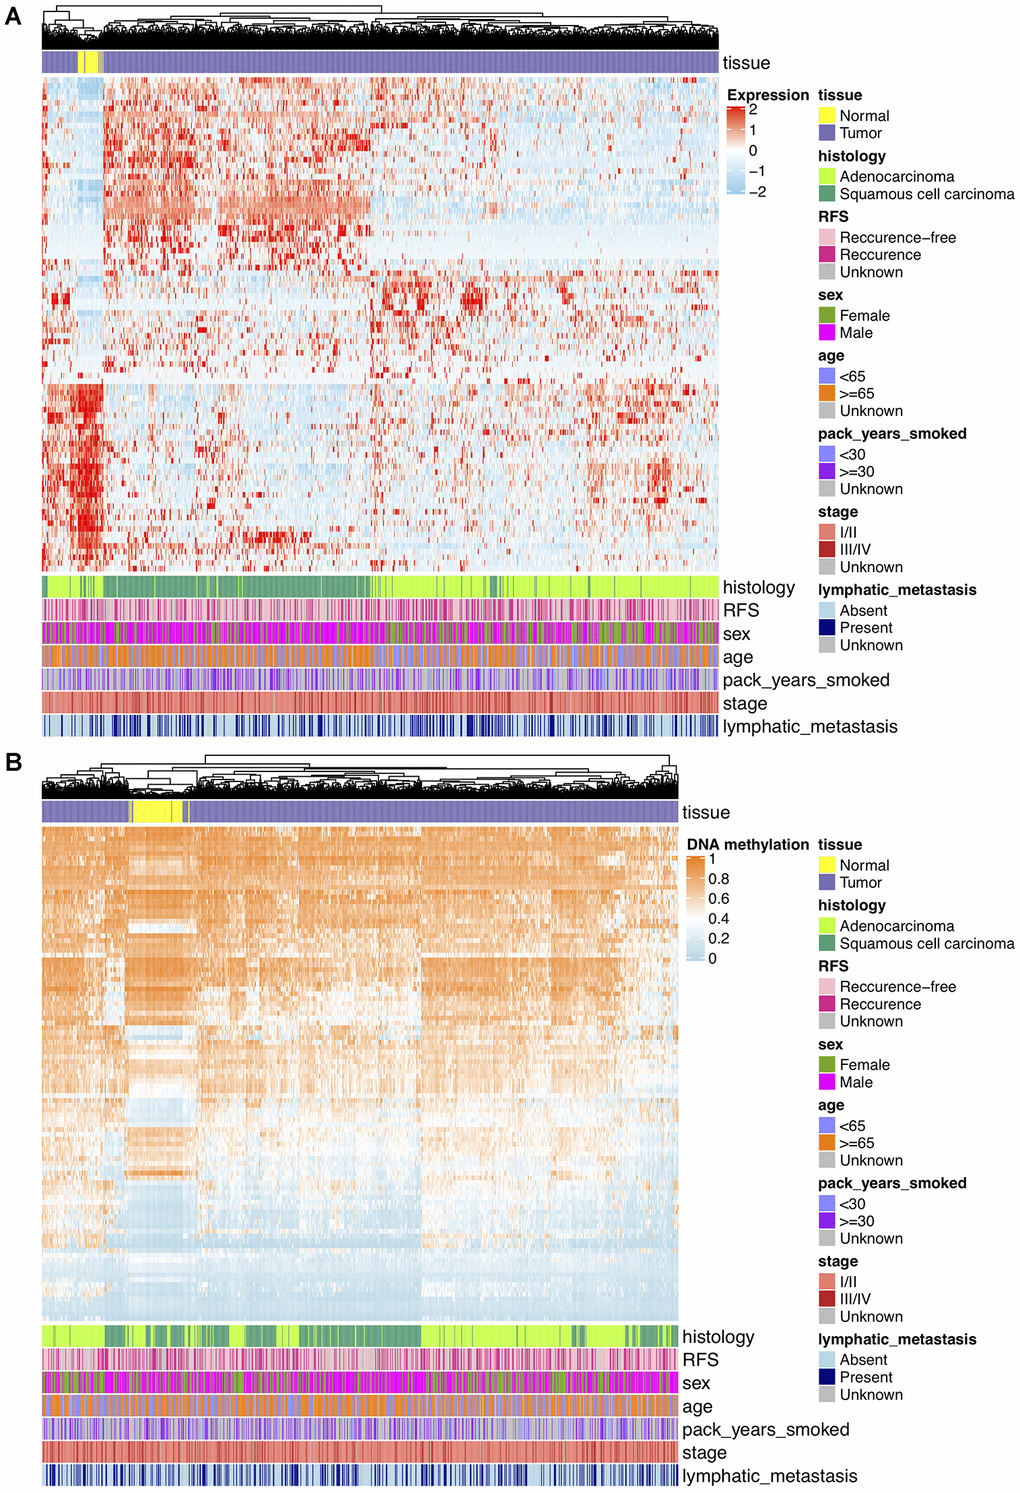 (A) Hierarchical clustering of 87 unique DEGs that potentially regulated by changes in DNAm levels at 102 selected loci based on TCGA NSCLC gene expression data (821 tumor and 28 normal samples). Clinical and demographic features, including age, sex, pack-years smoked, histology, stage, lymphatic metastasis and clinical outcome (RFS, recurrence-free survival status). High expression, red; low expression, skyblue. (B) Hierarchical clustering of 102 significantly DMPs between NSCLC (n=827) and normal (n=74) samples. Hopomethylated CpGs, skyblue; hypermethylated CpGs, orange.